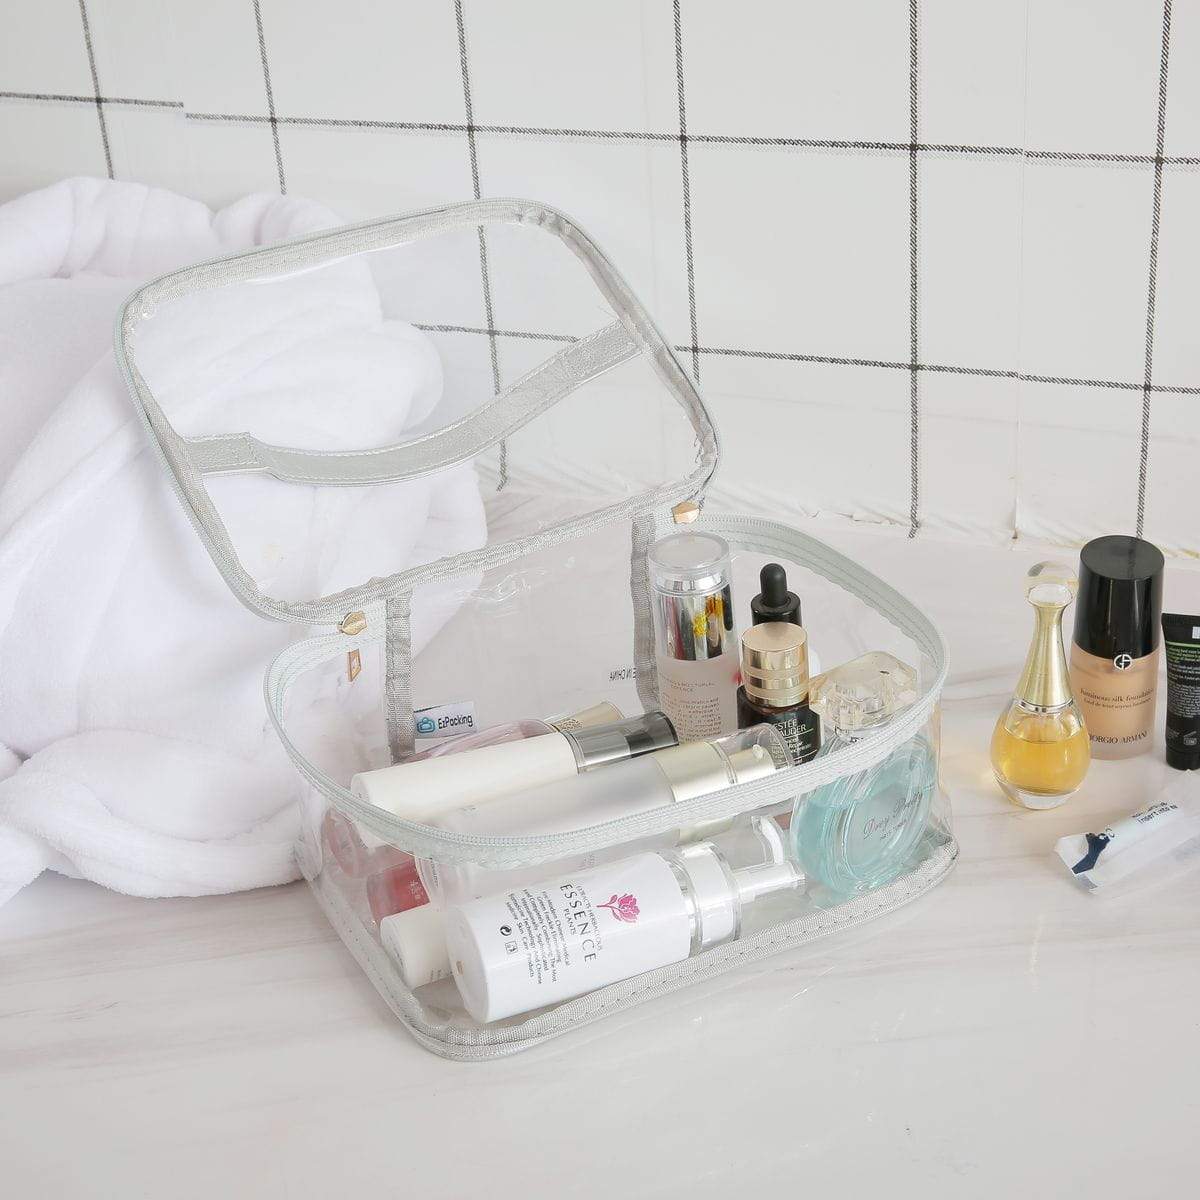 Large Clear Makeup Toiletry Bag for Travel - Transparent Cosmetics ...